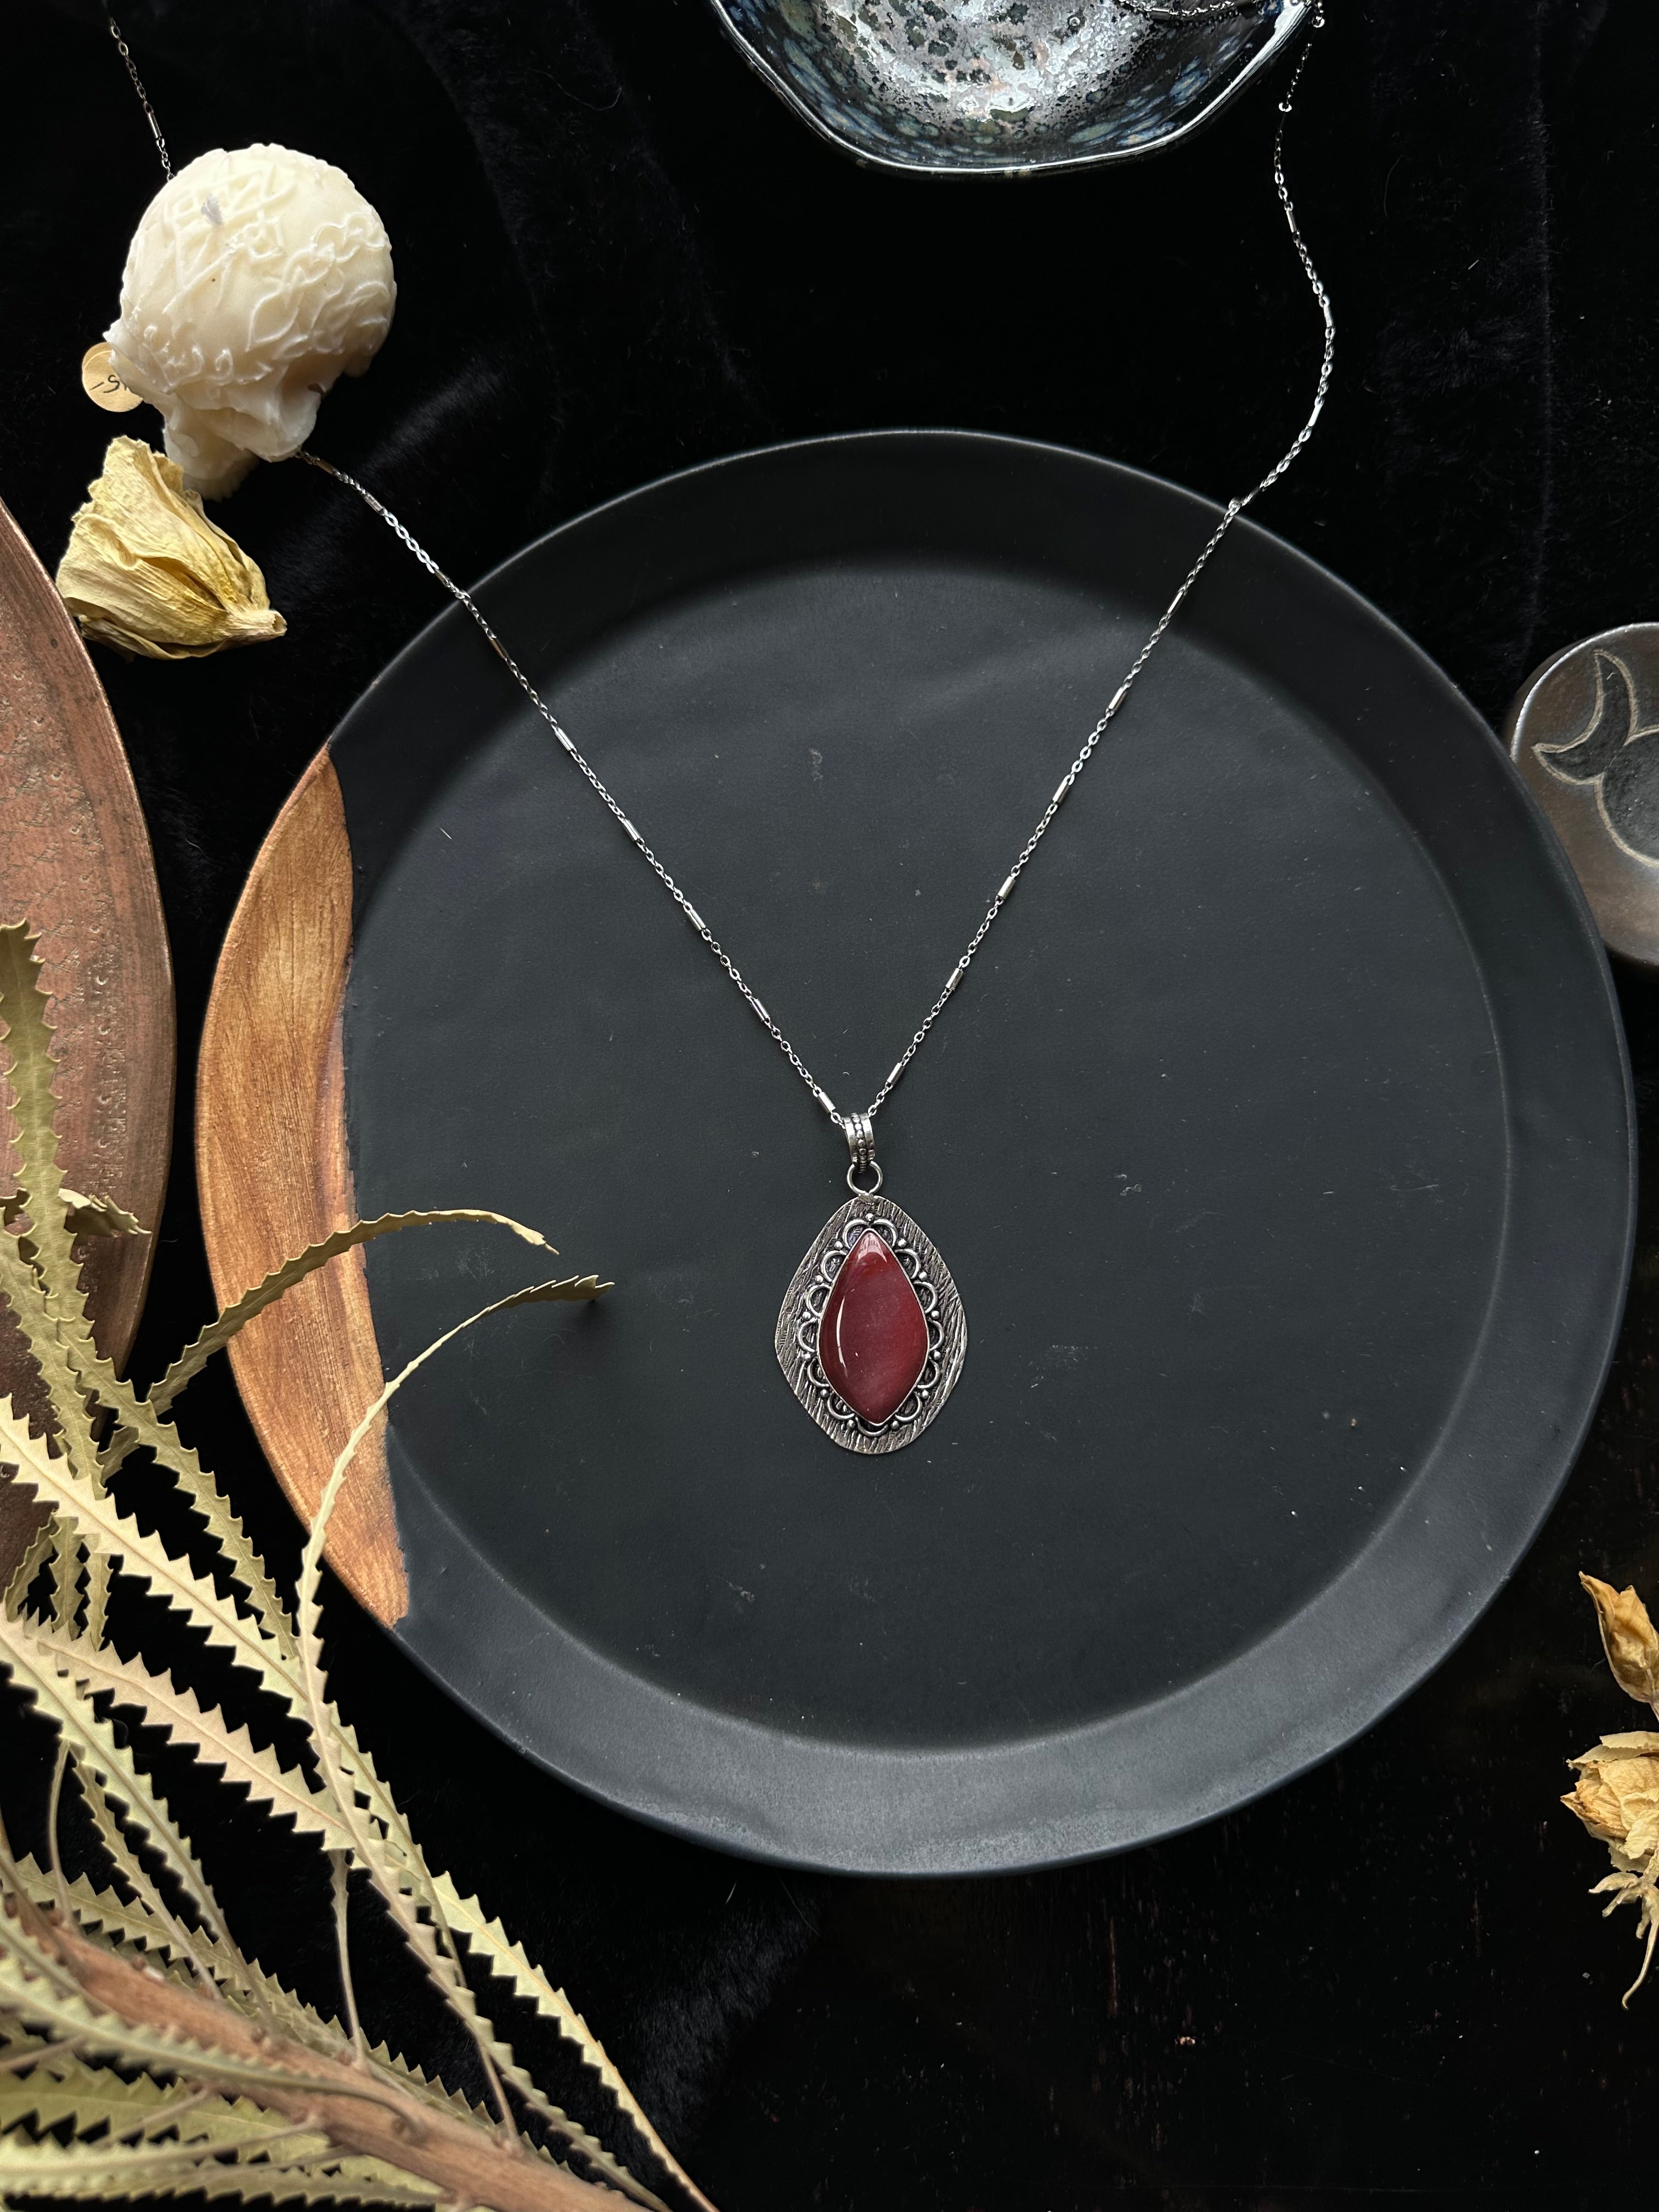 Strawberry Quartz Sterling Silver Teardrop Necklace - 30" (Stainless Steel Chain)